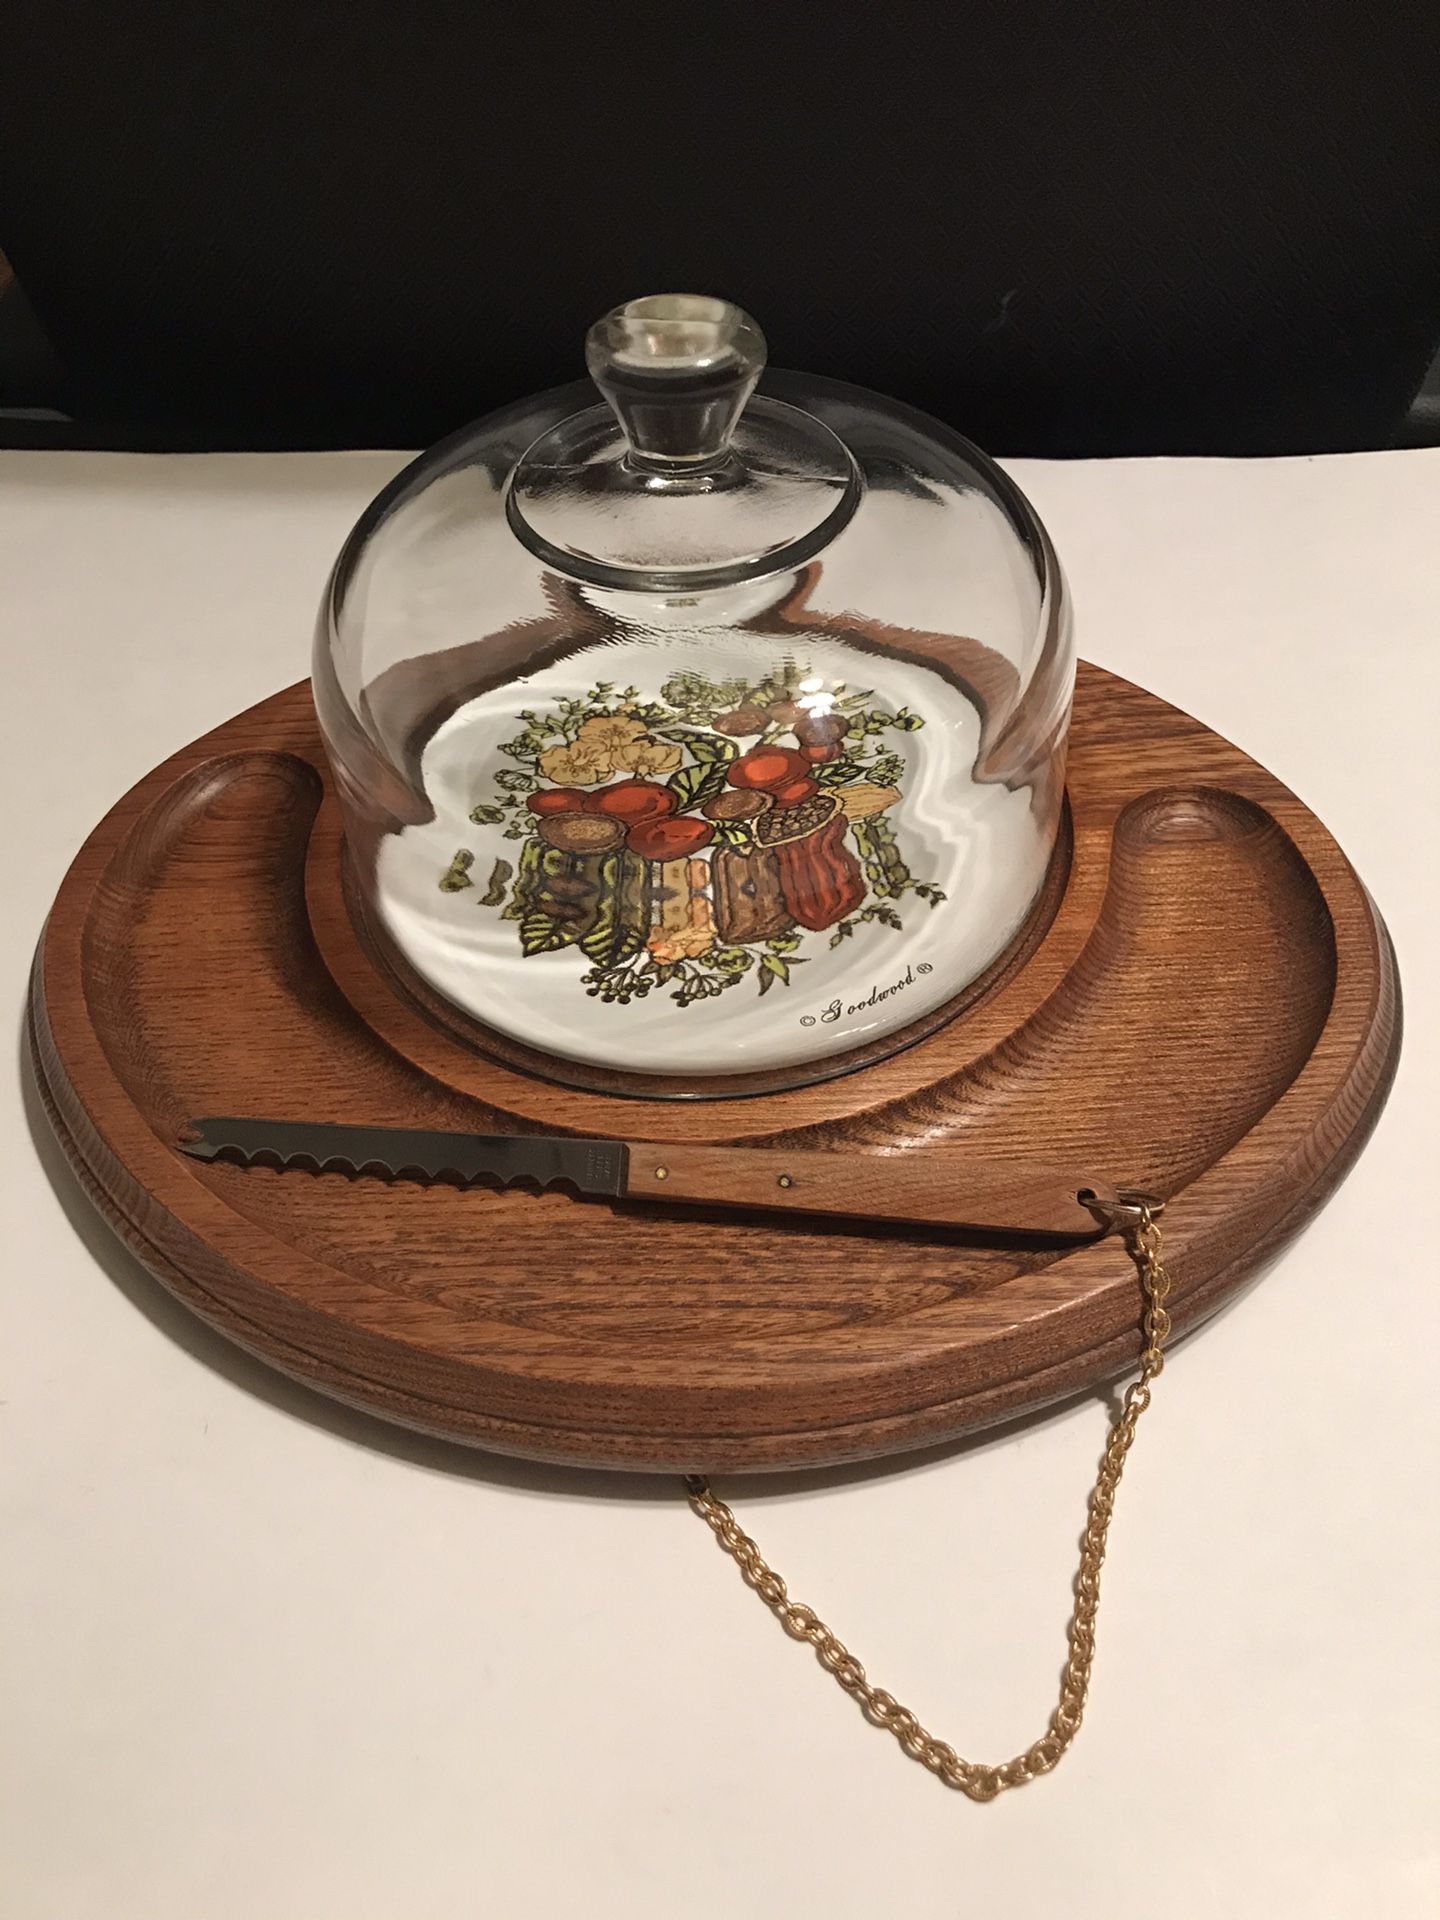 VINTAGE Corning Spice of Life GOODWOOD Tray Plate 6 3/4” Glass Dome with Knife